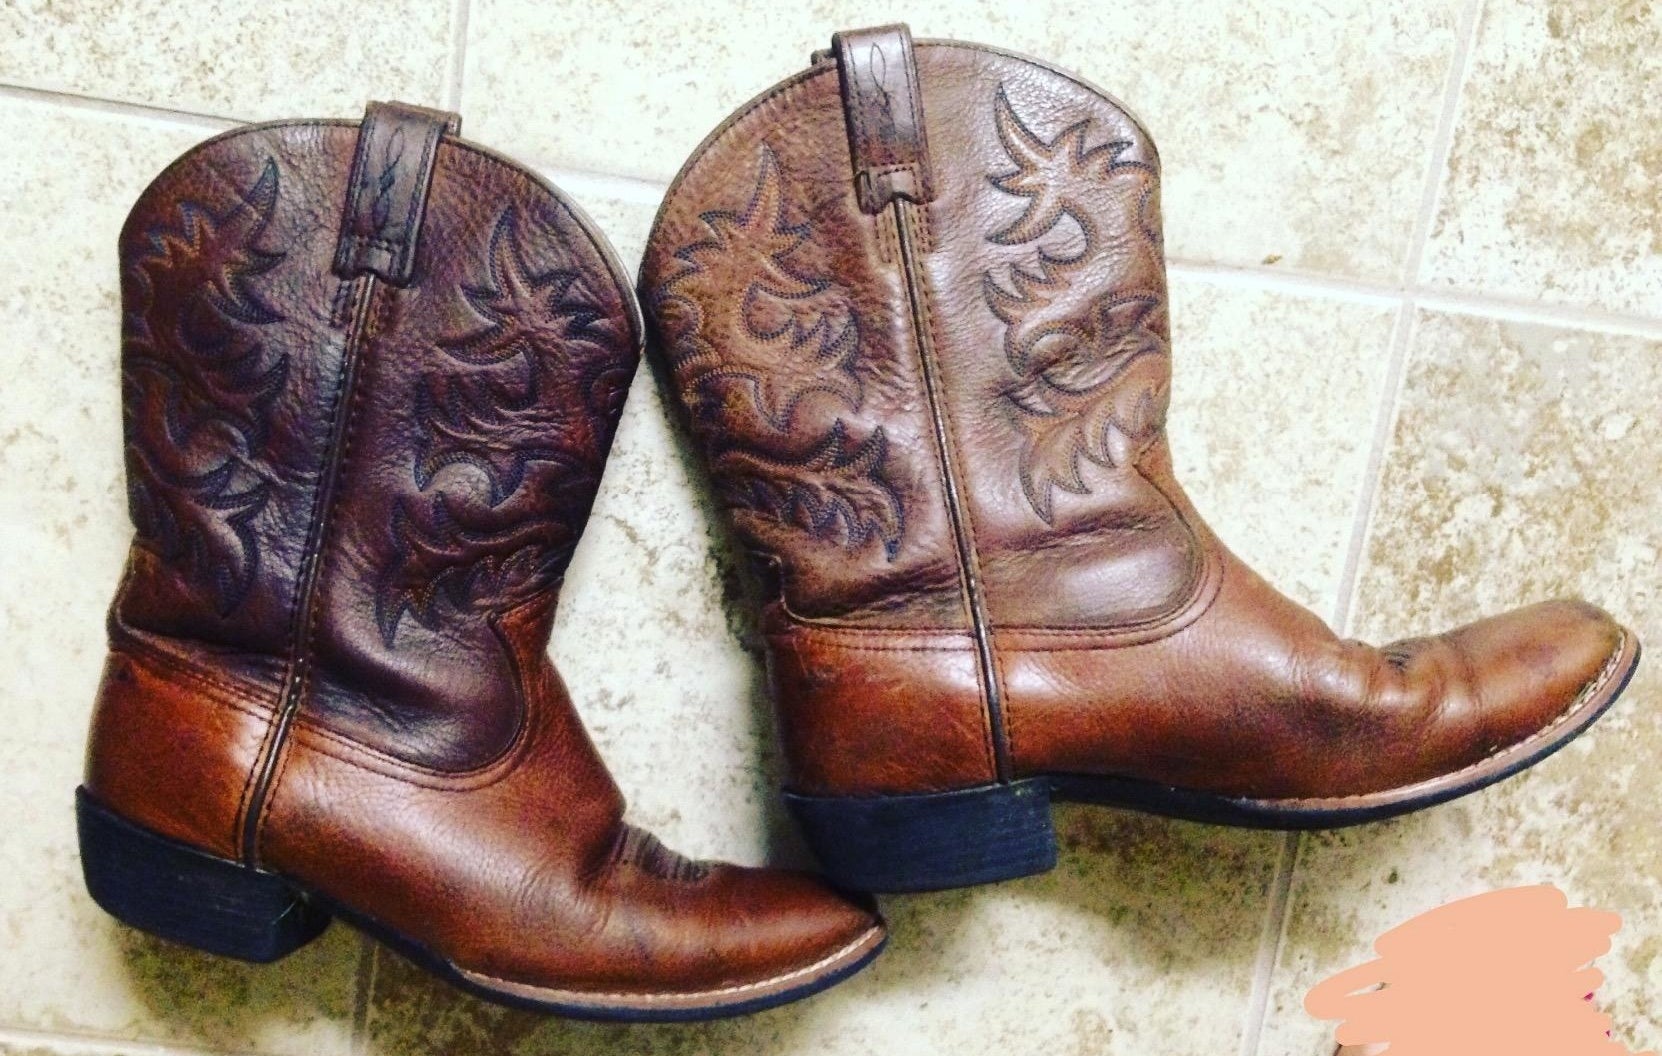 reviewer&#x27;s boots restored to looking brand new after using a leather conditioner